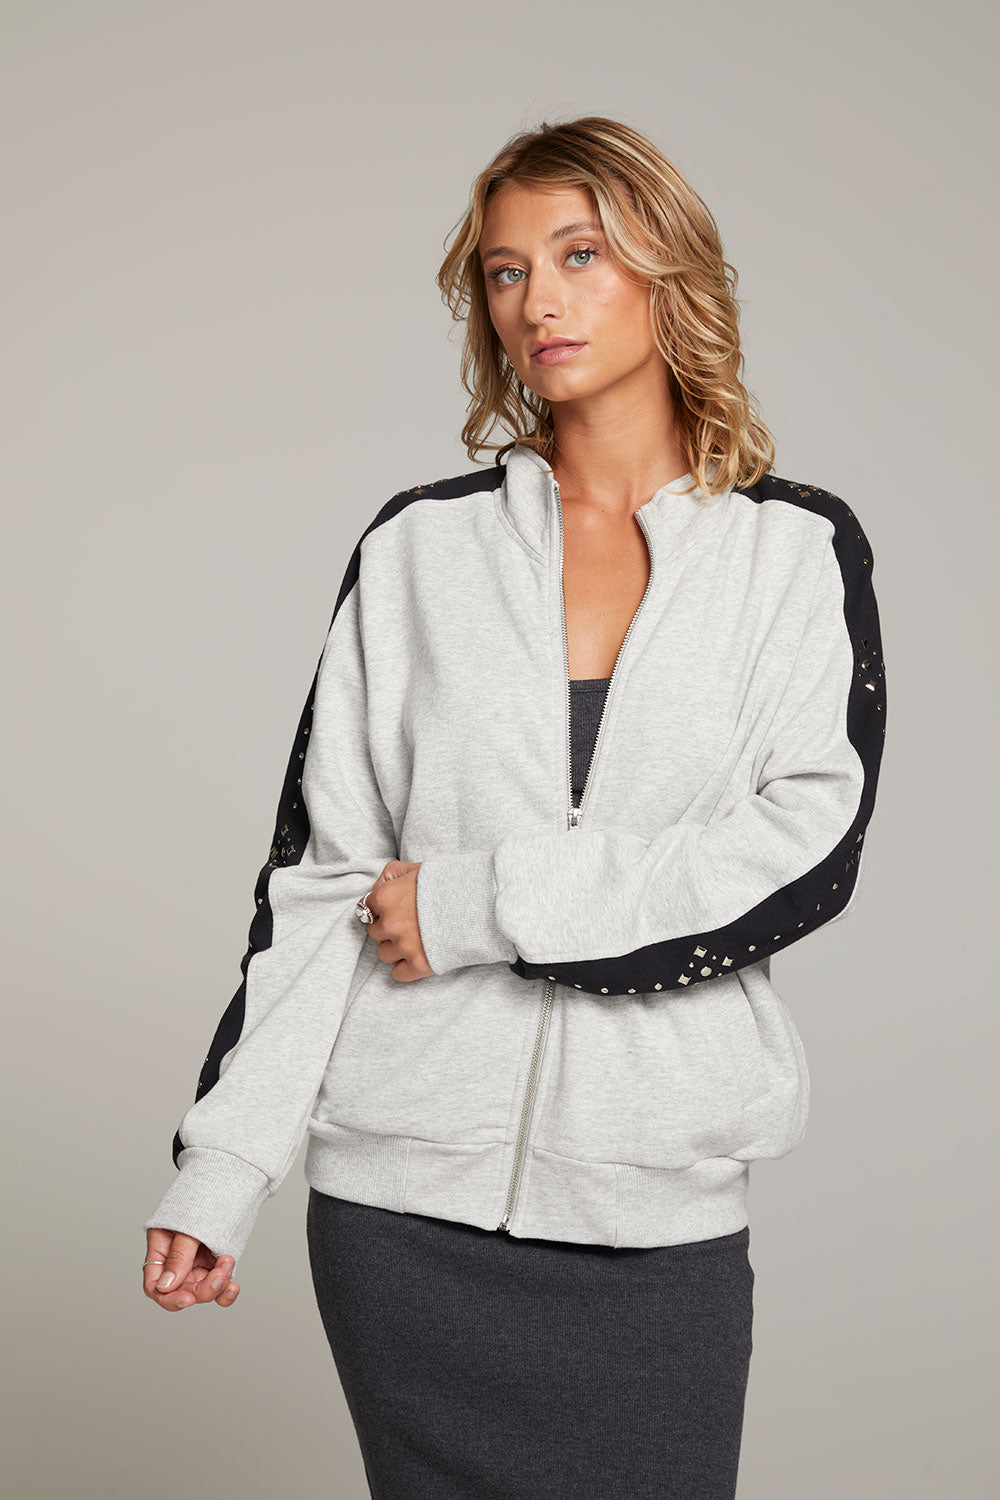 Coconut Zip Up Jacket WOMENS chaserbrand